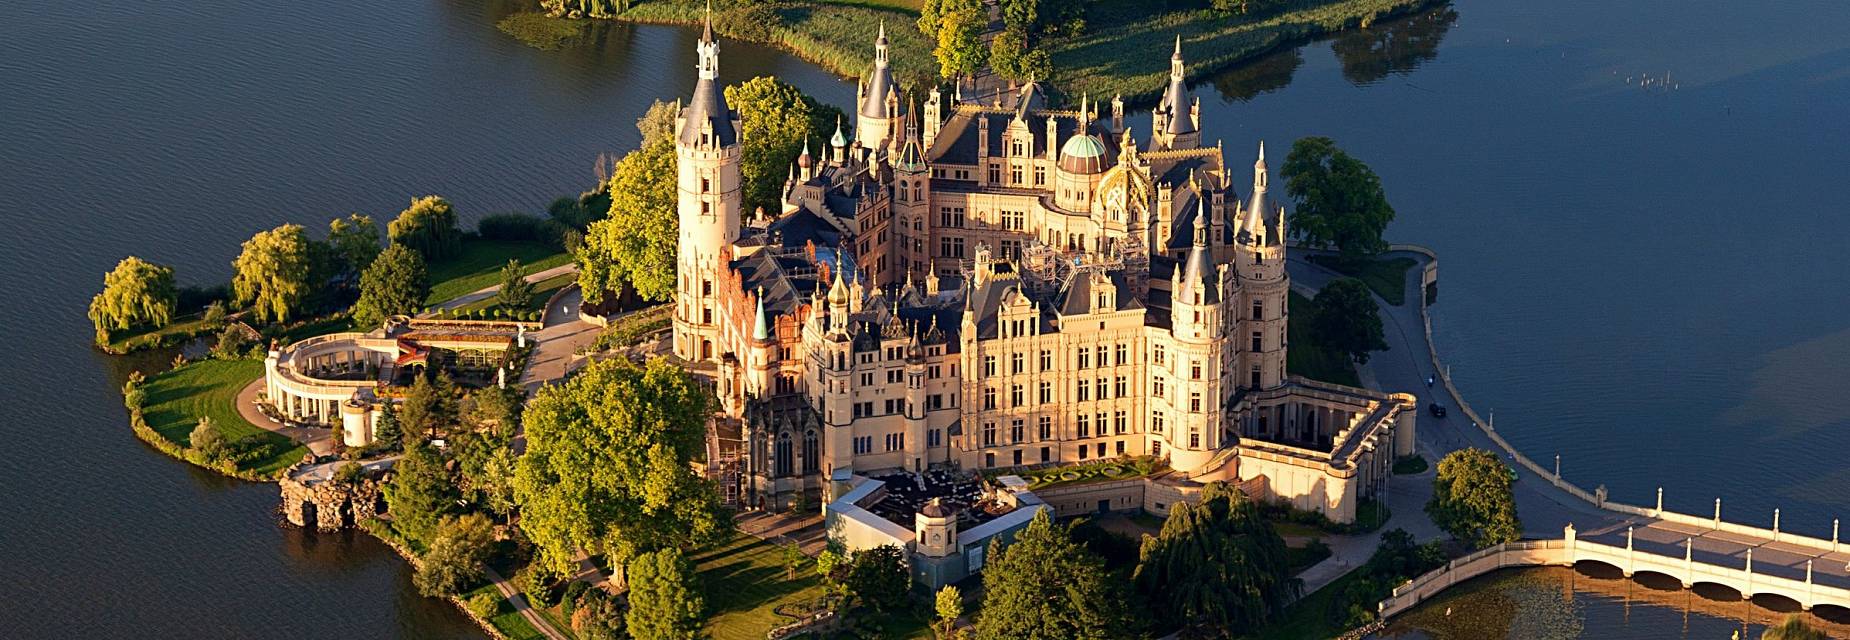 Nice Images Collection: Schwerin Palace Desktop Wallpapers